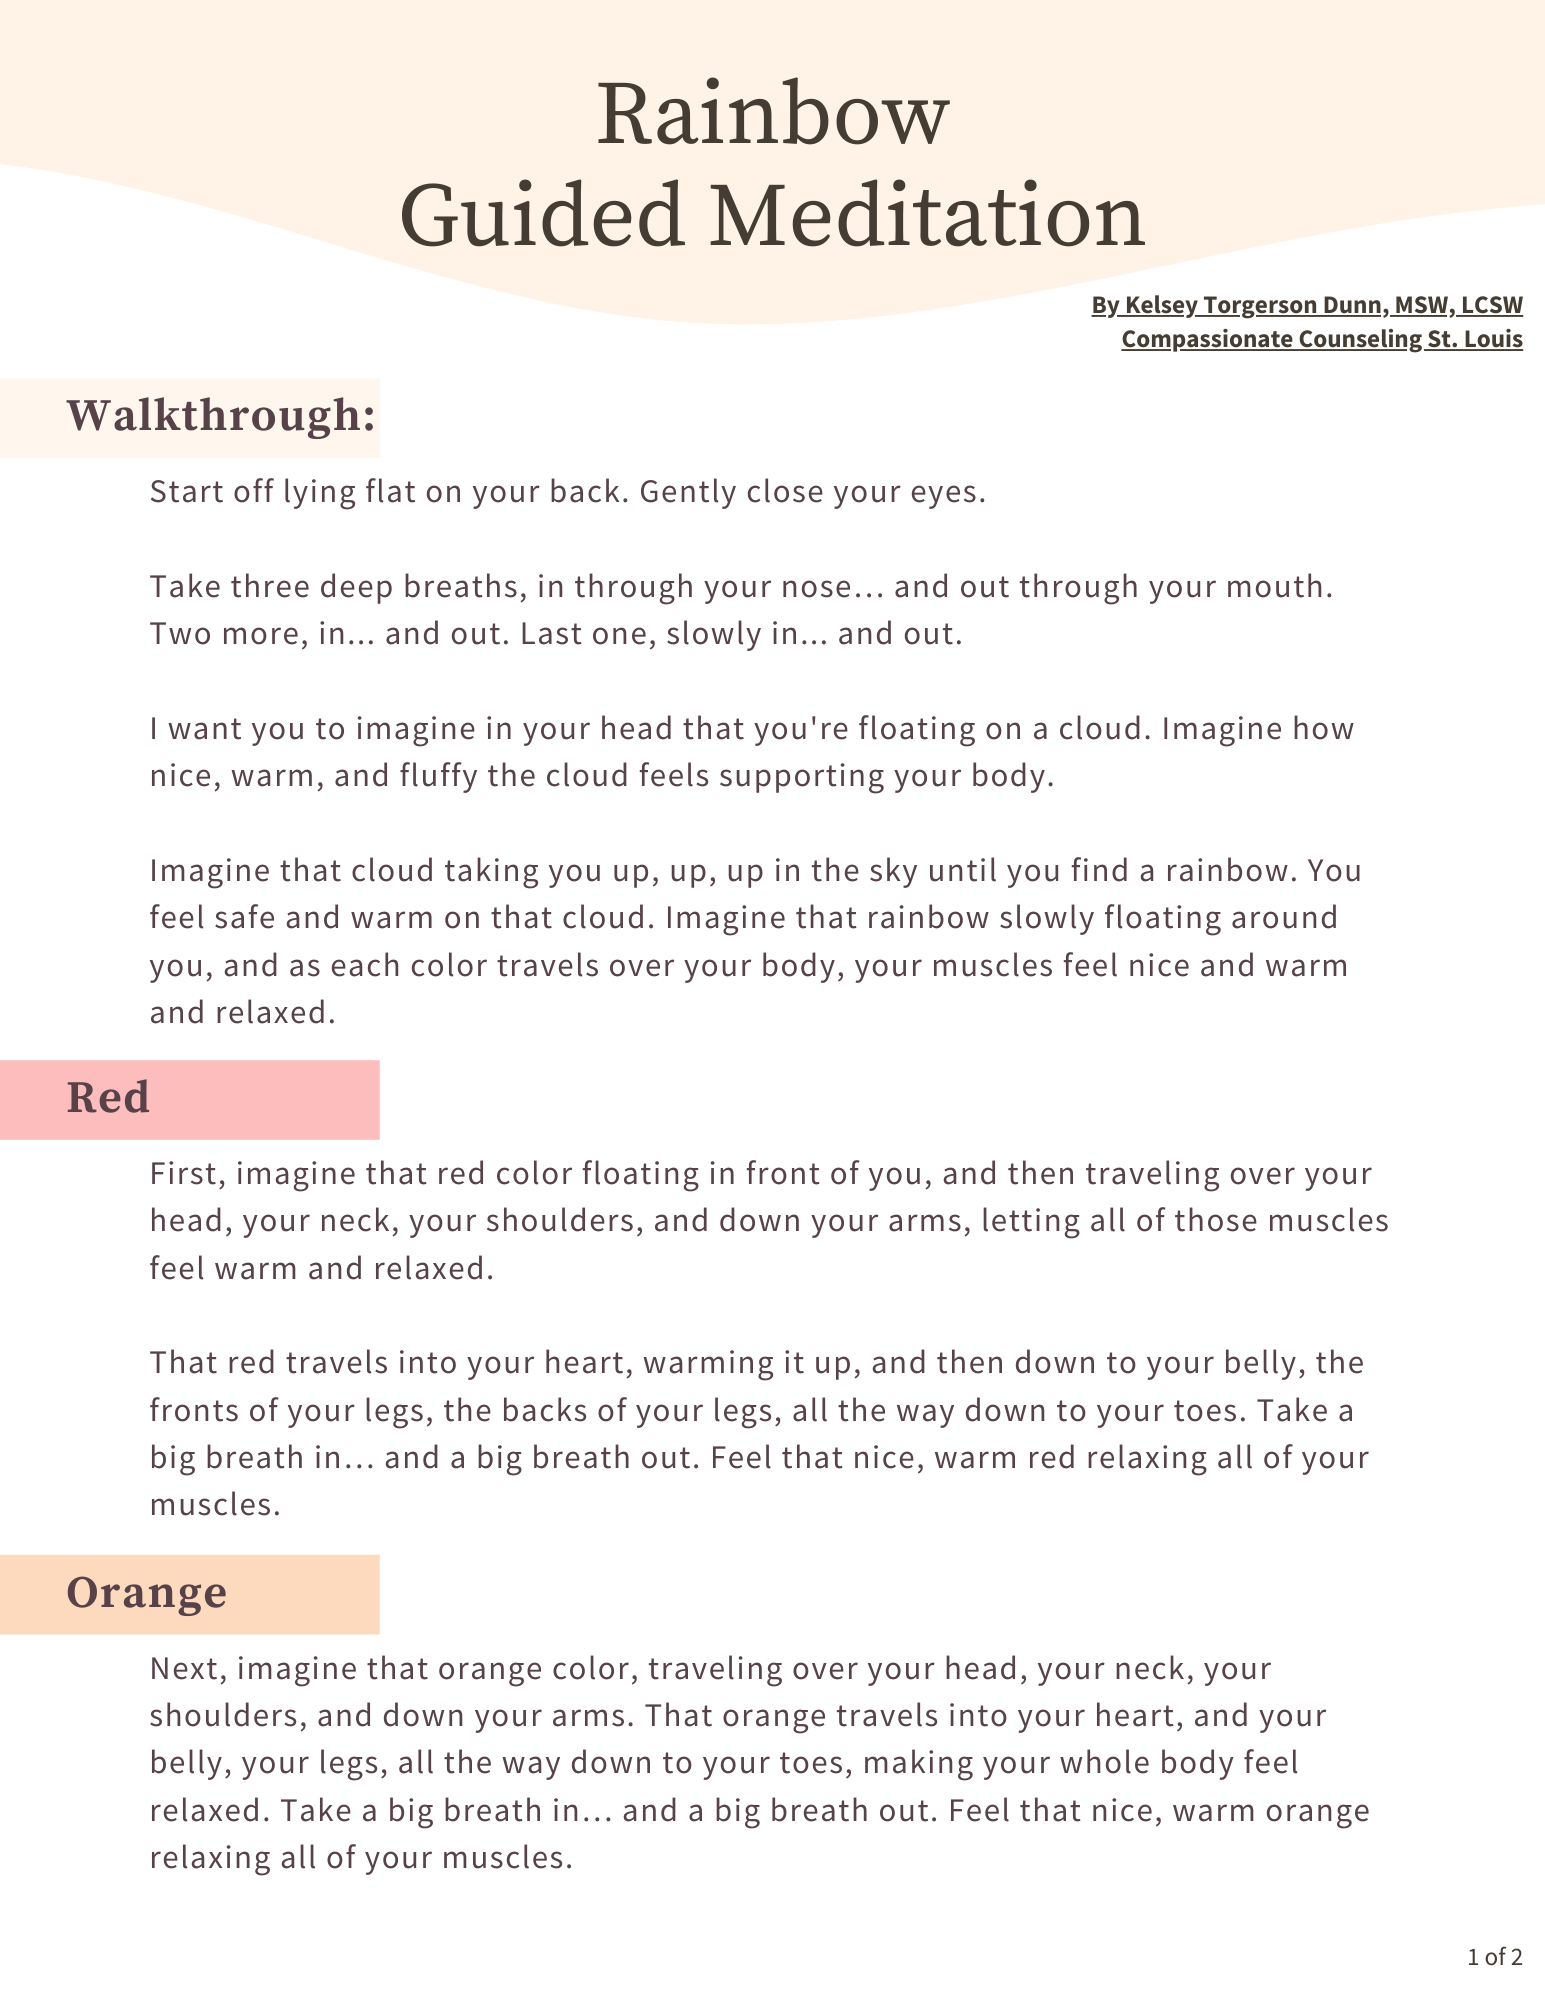 Rainbow Guided Meditation: Relaxation Walk-Through for Kids ...